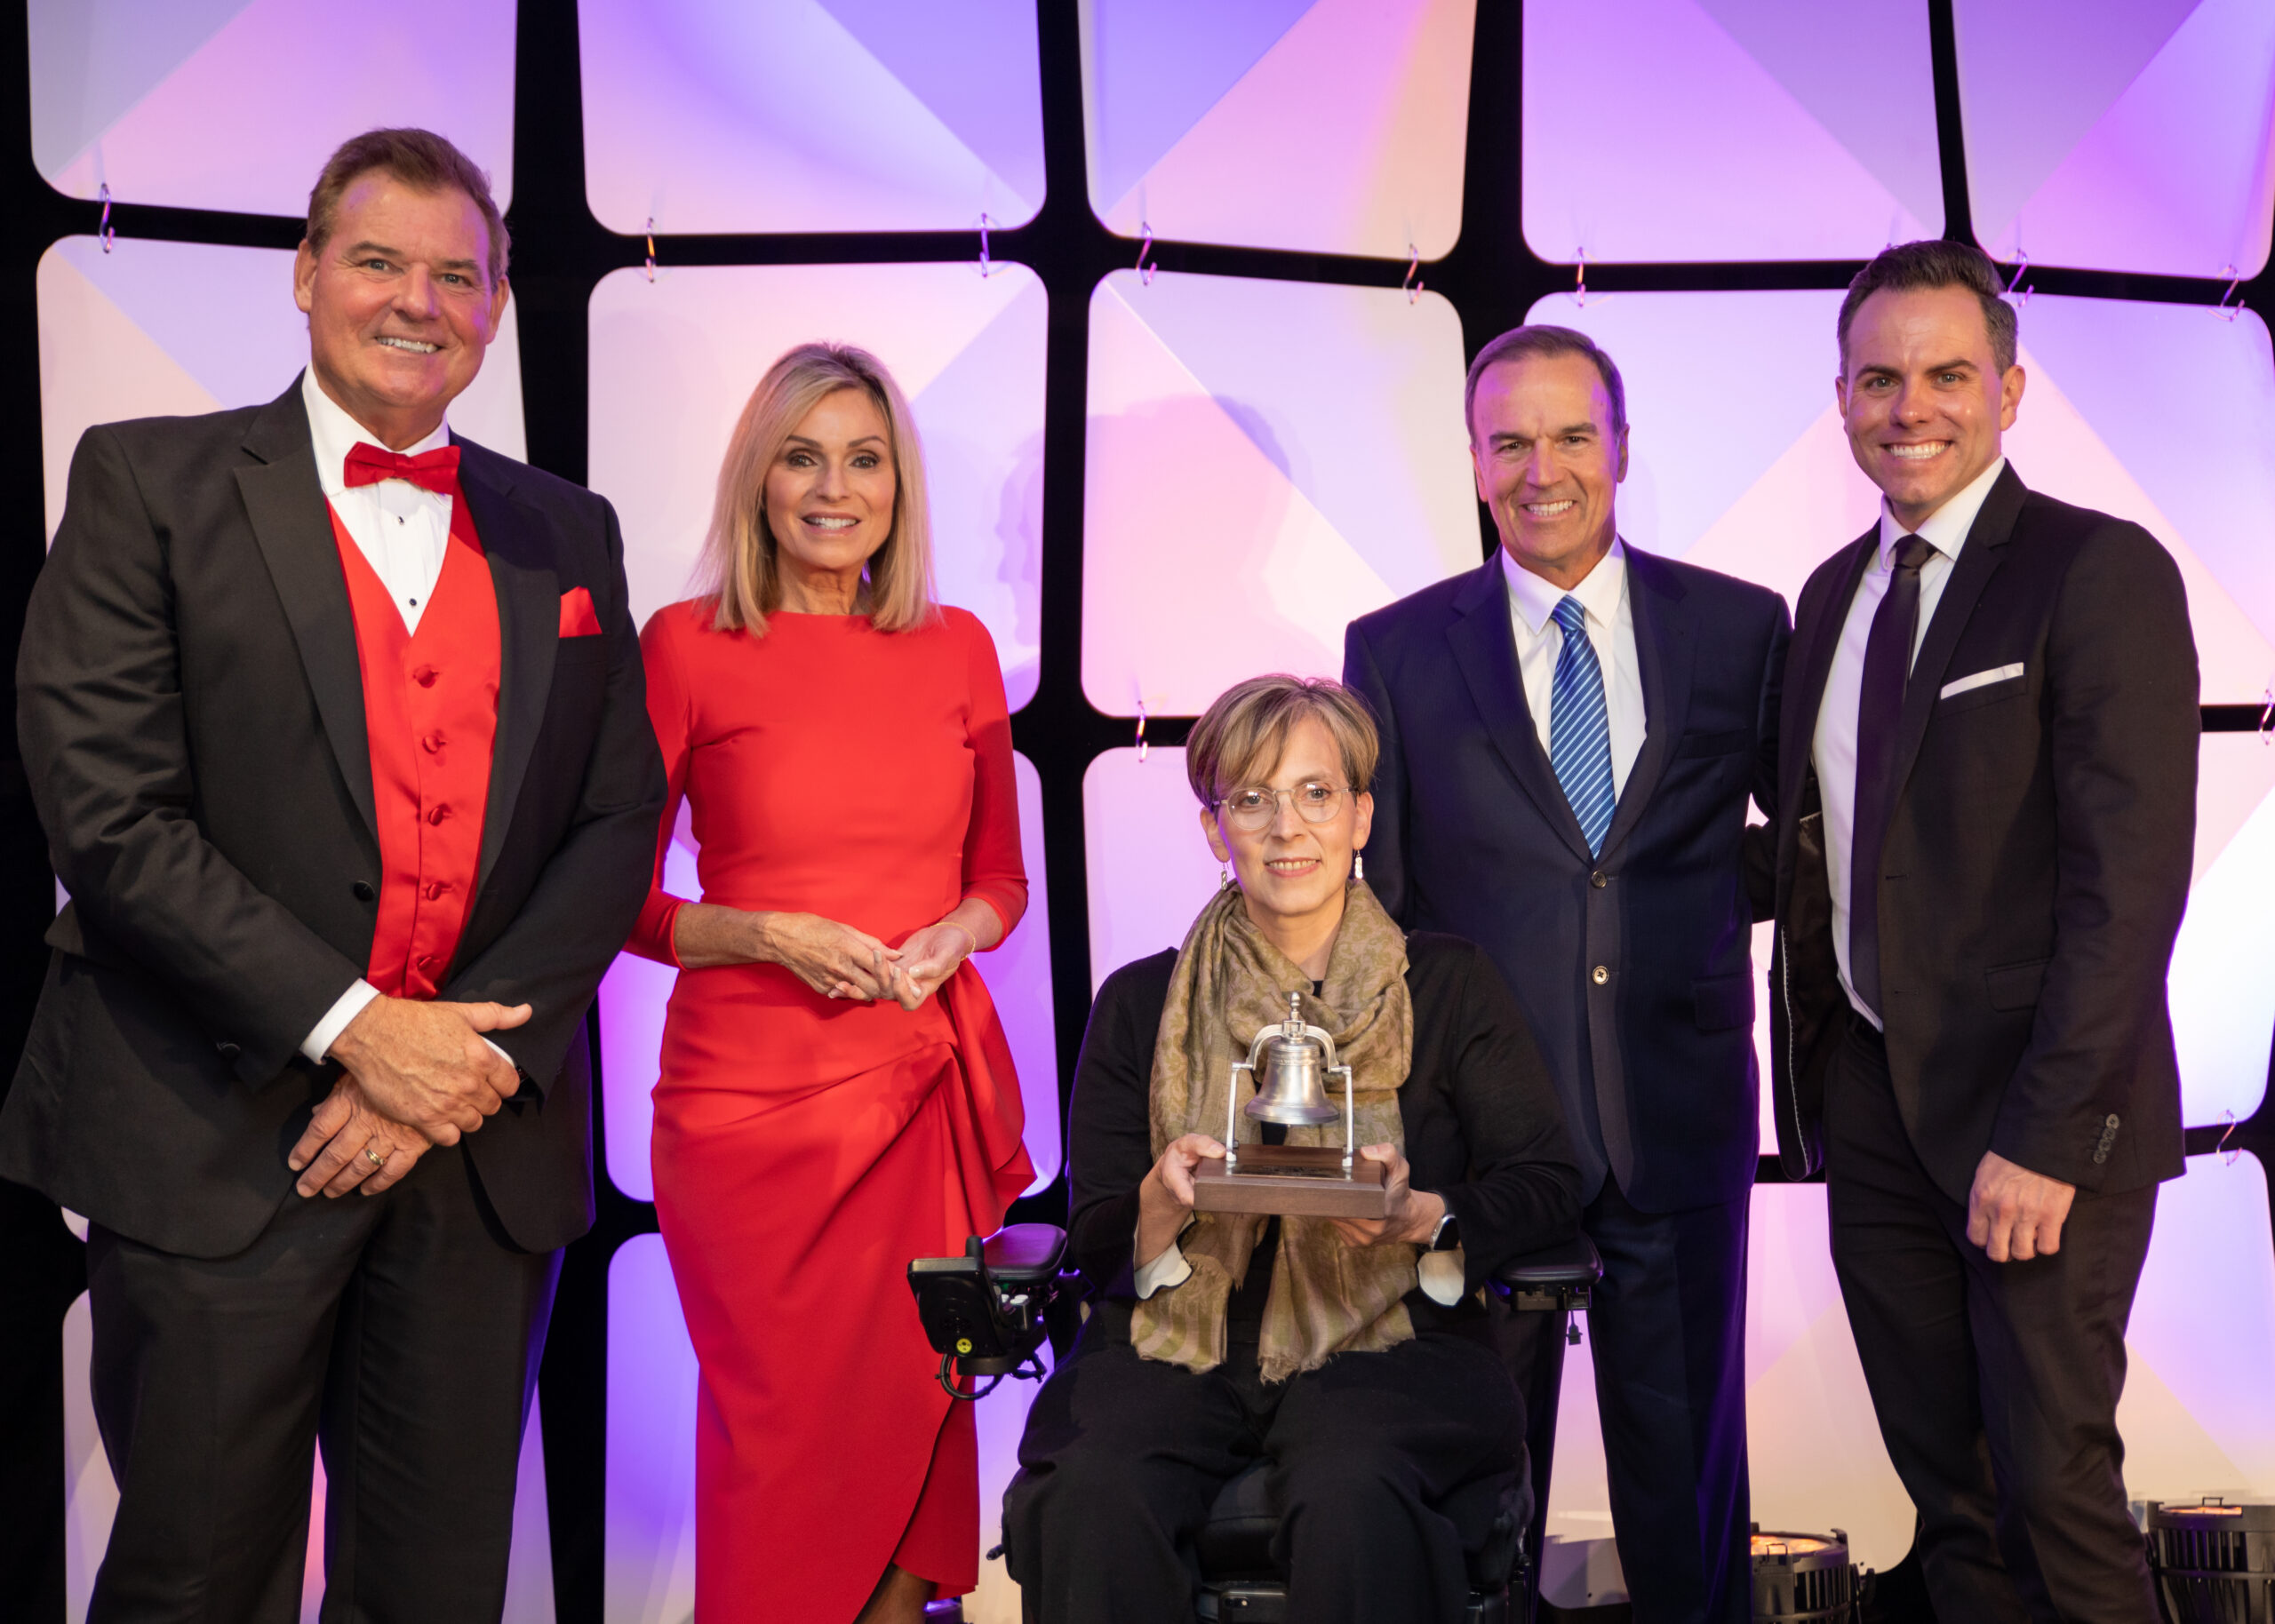 A smiling woman seated in wheelchair holding a Bell Award flanked by four local TV personalities, two on each side.